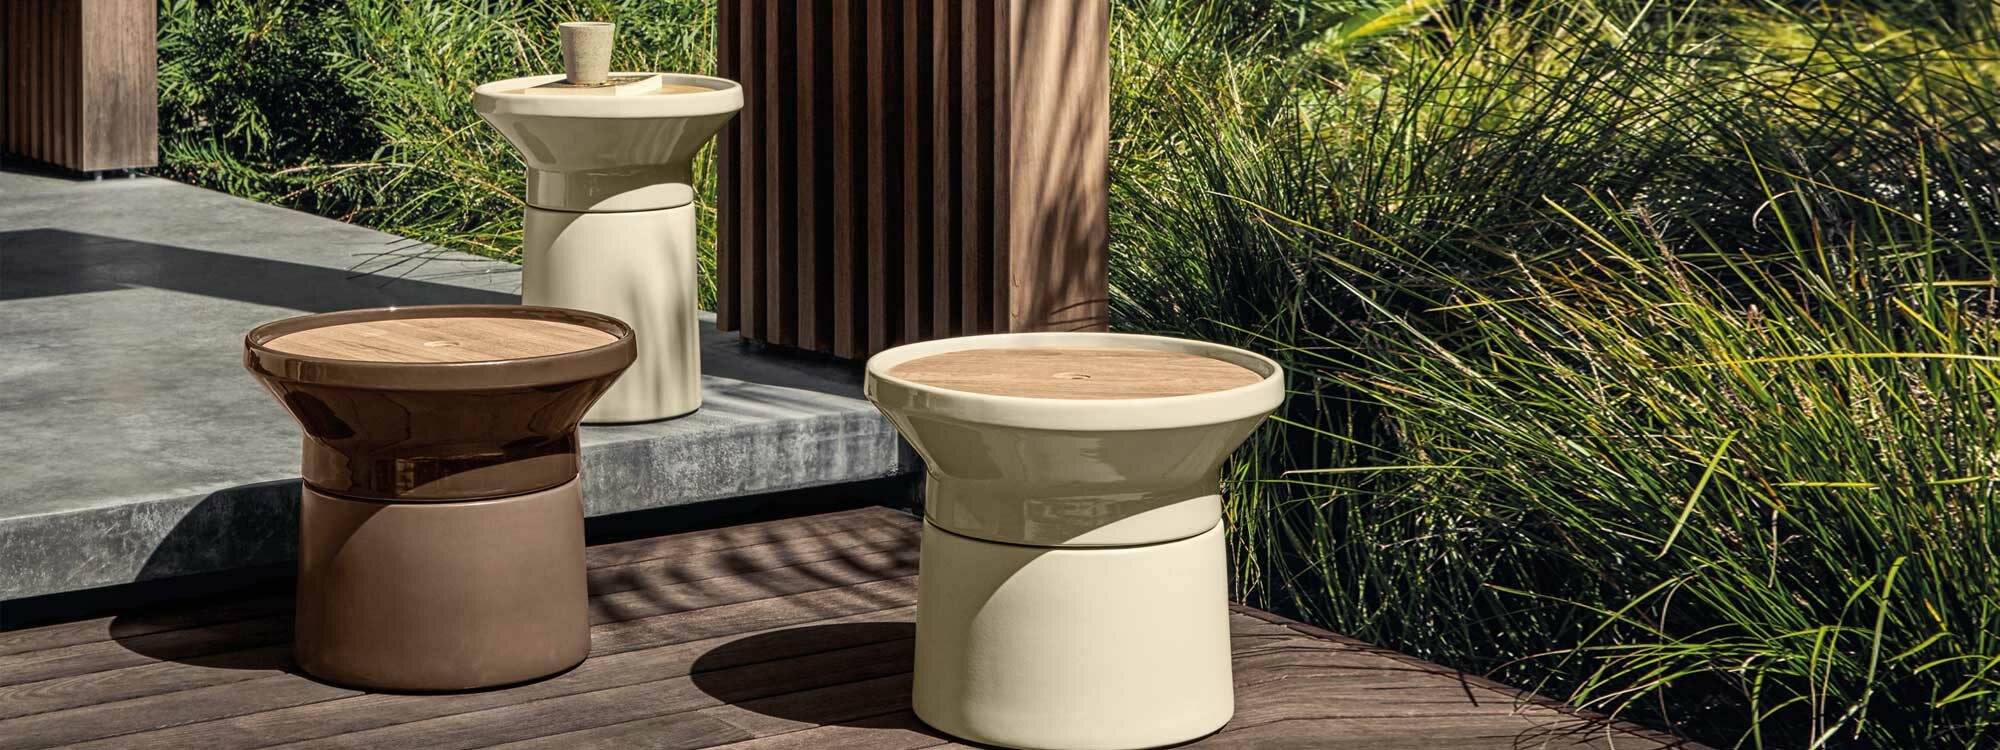 Image of different sizes of Coso outdoor low tables in sand and earth glazed ceramic finishes by Gloster, with architectural grasses in the background